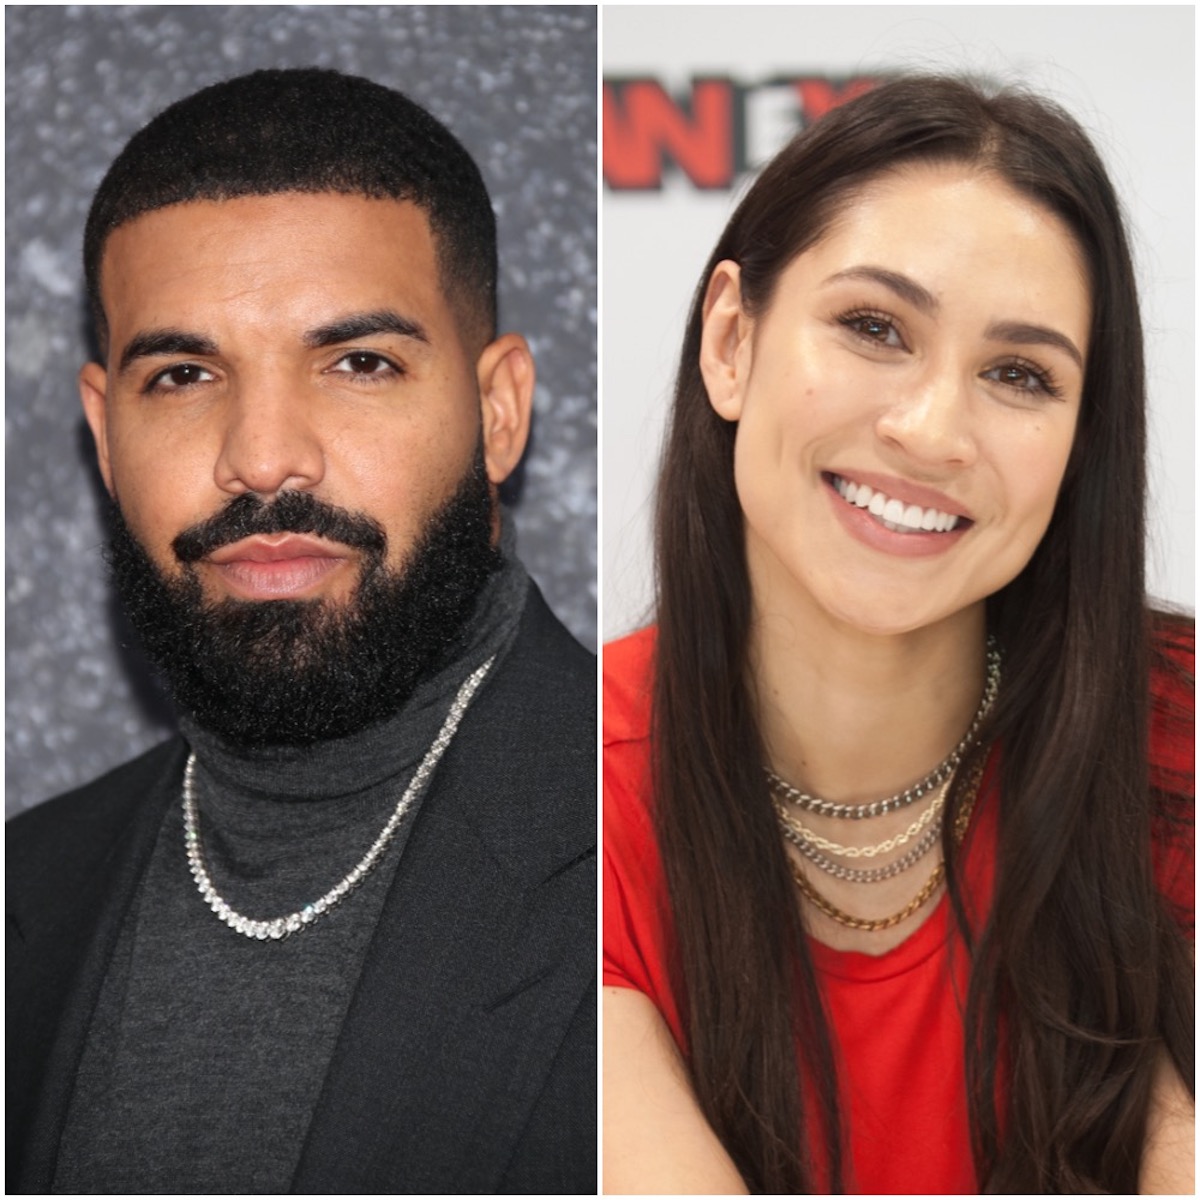 Drake and Cassie Steele in photos